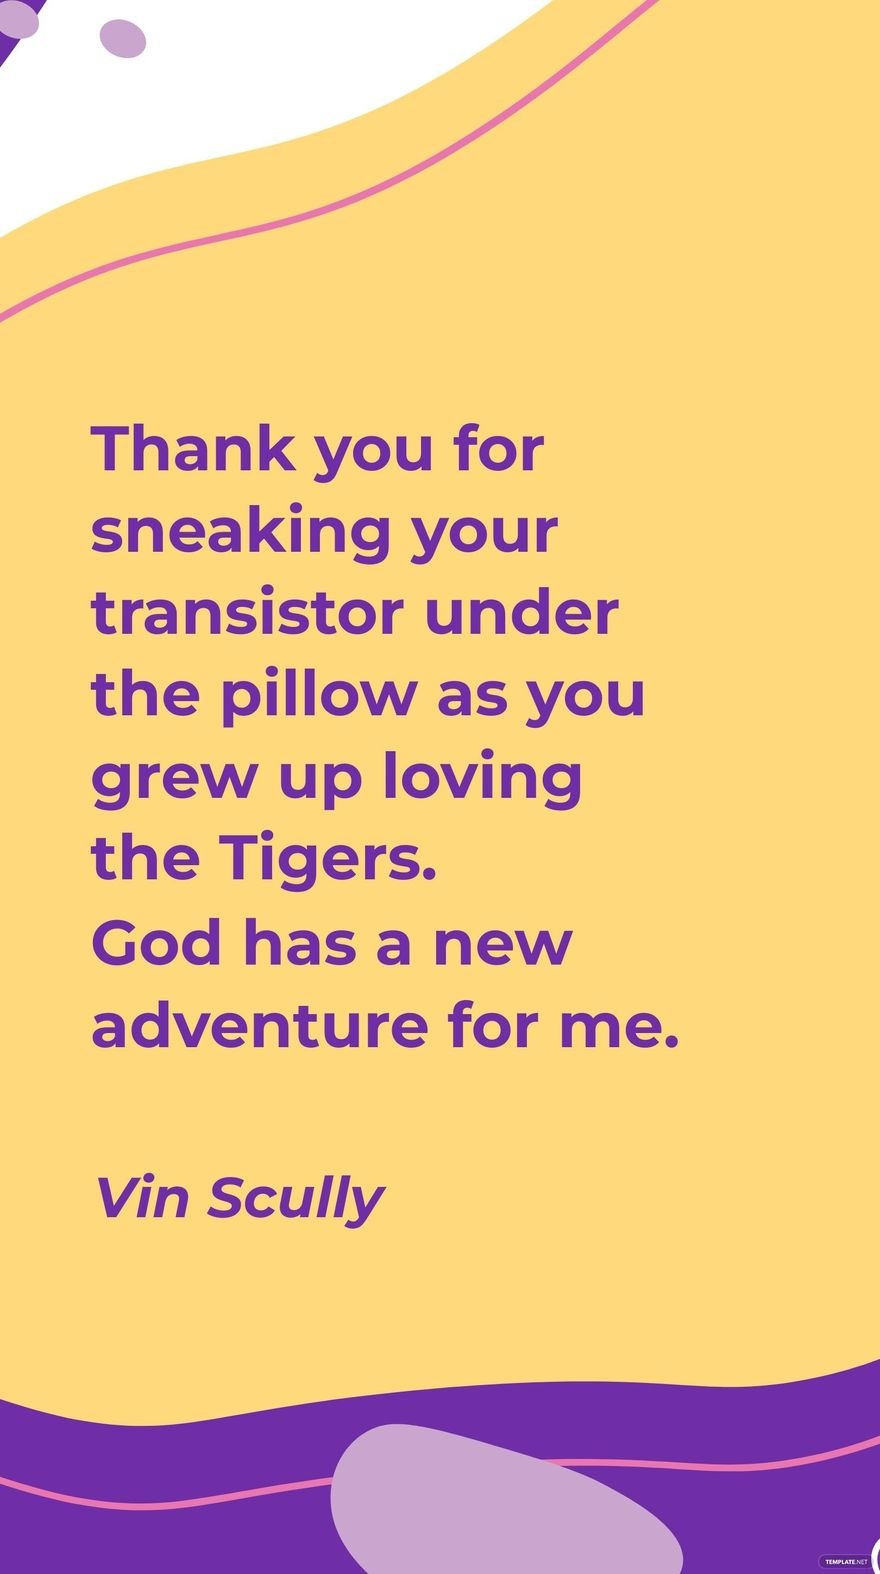 Vin Scully - Thank you for sneaking your transistor under the pillow as you grew up loving the Tigers. God has a new adventure for me.